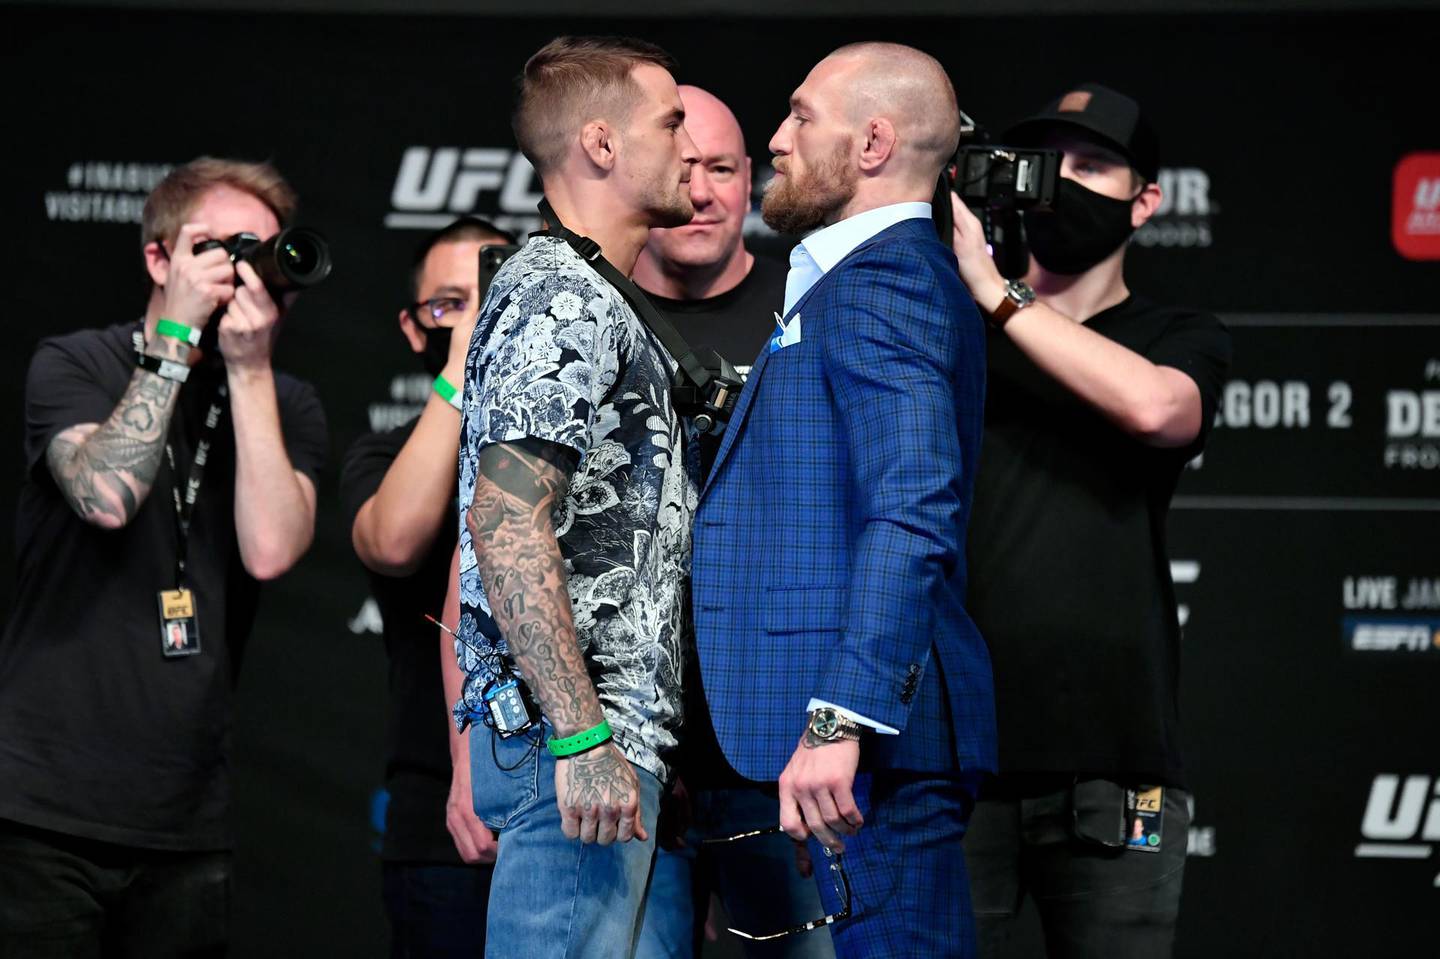 ABU DHABI, UNITED ARAB EMIRATES - JANUARY 21:  In this handout image provided by the UFC, (L-R) Opponents Dustin Poirier and Conor McGregor pose face off for media during the UFC 257 press conference event inside Etihad Arena on UFC Fight Island on January 21, 2021 in Yas Island, Abu Dhabi, United Arab Emirates. (Photo by Jeff Bottari/Zuffa LLC via Getty Images)